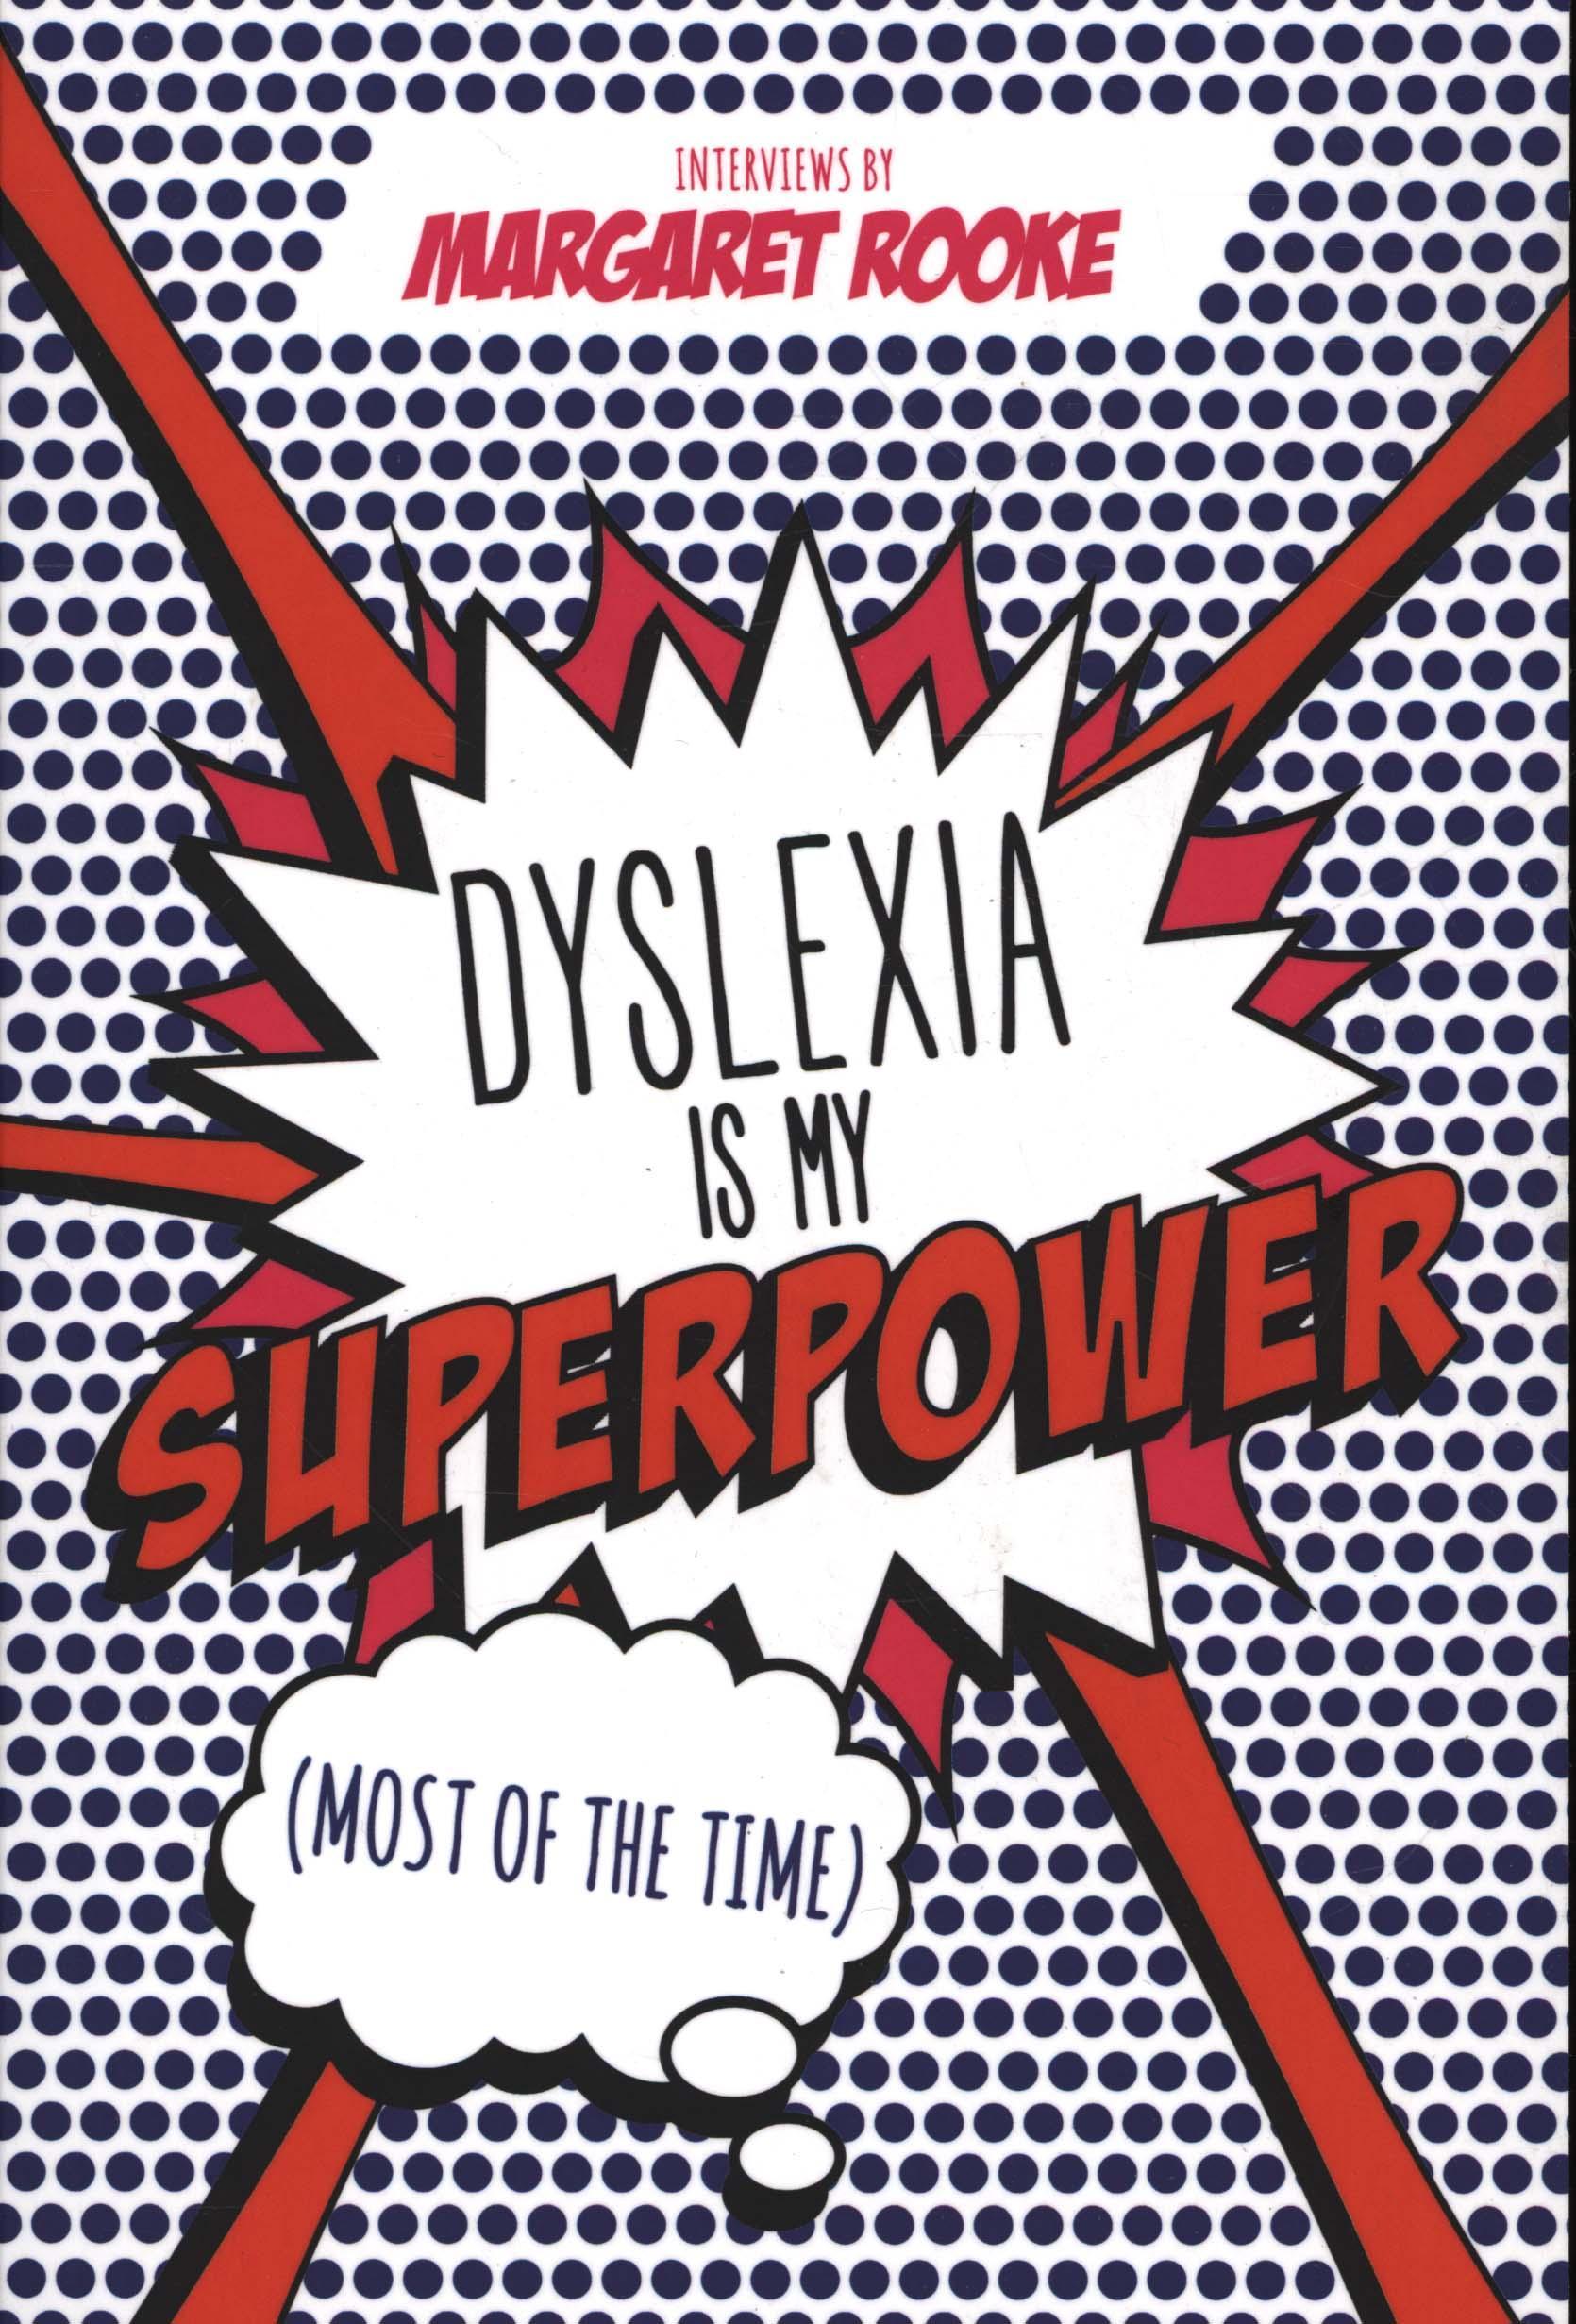 Dyslexia is My Superpower (Most of the Time)